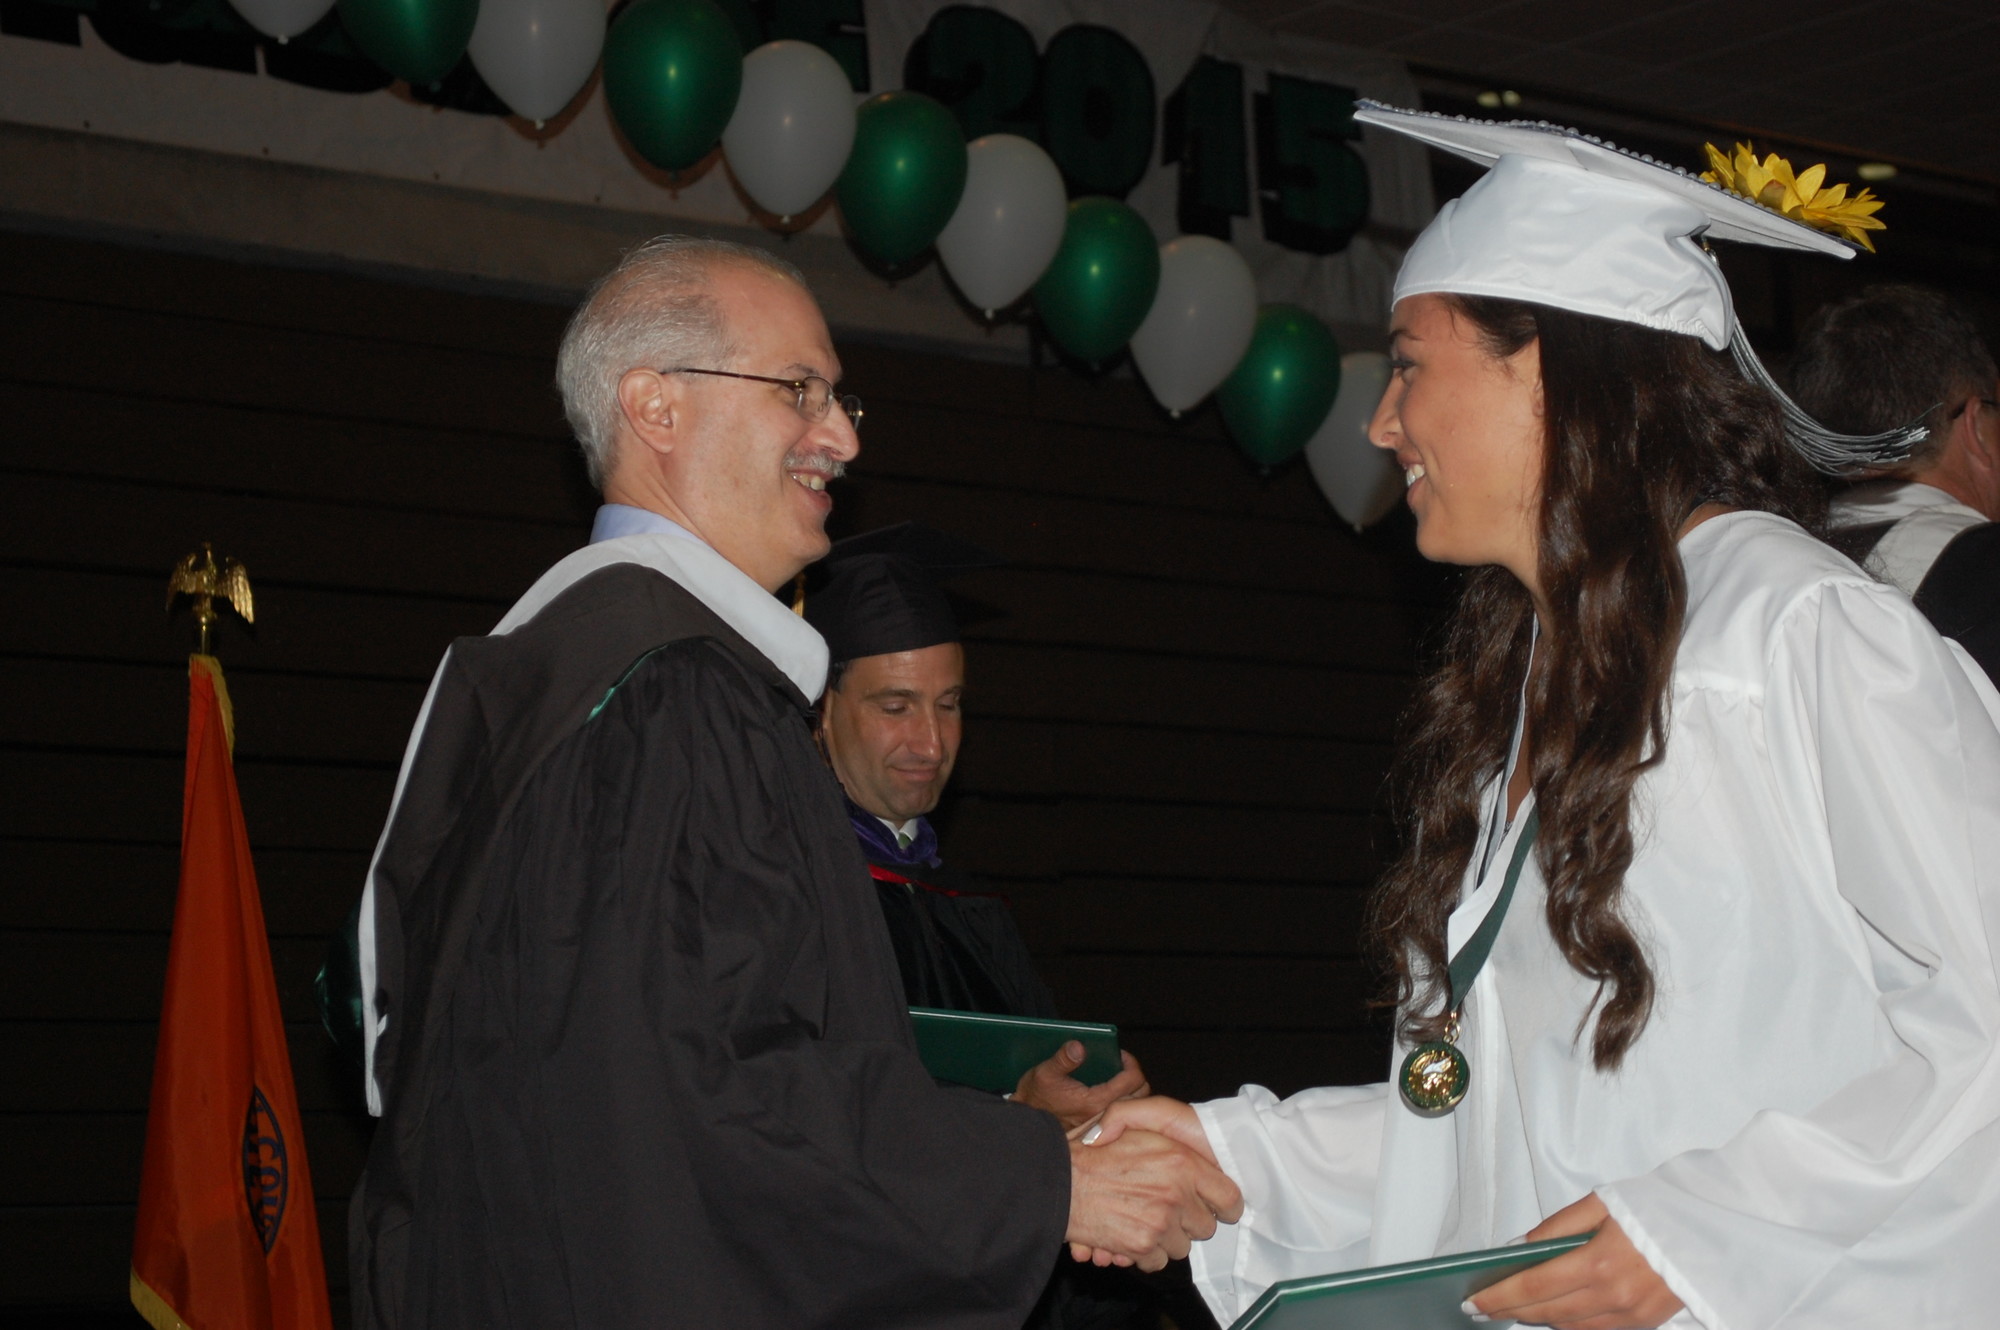 Board of Education President Bruce Kahn congratulated Shannon Duncan as she came up on stage to receive her diploma.